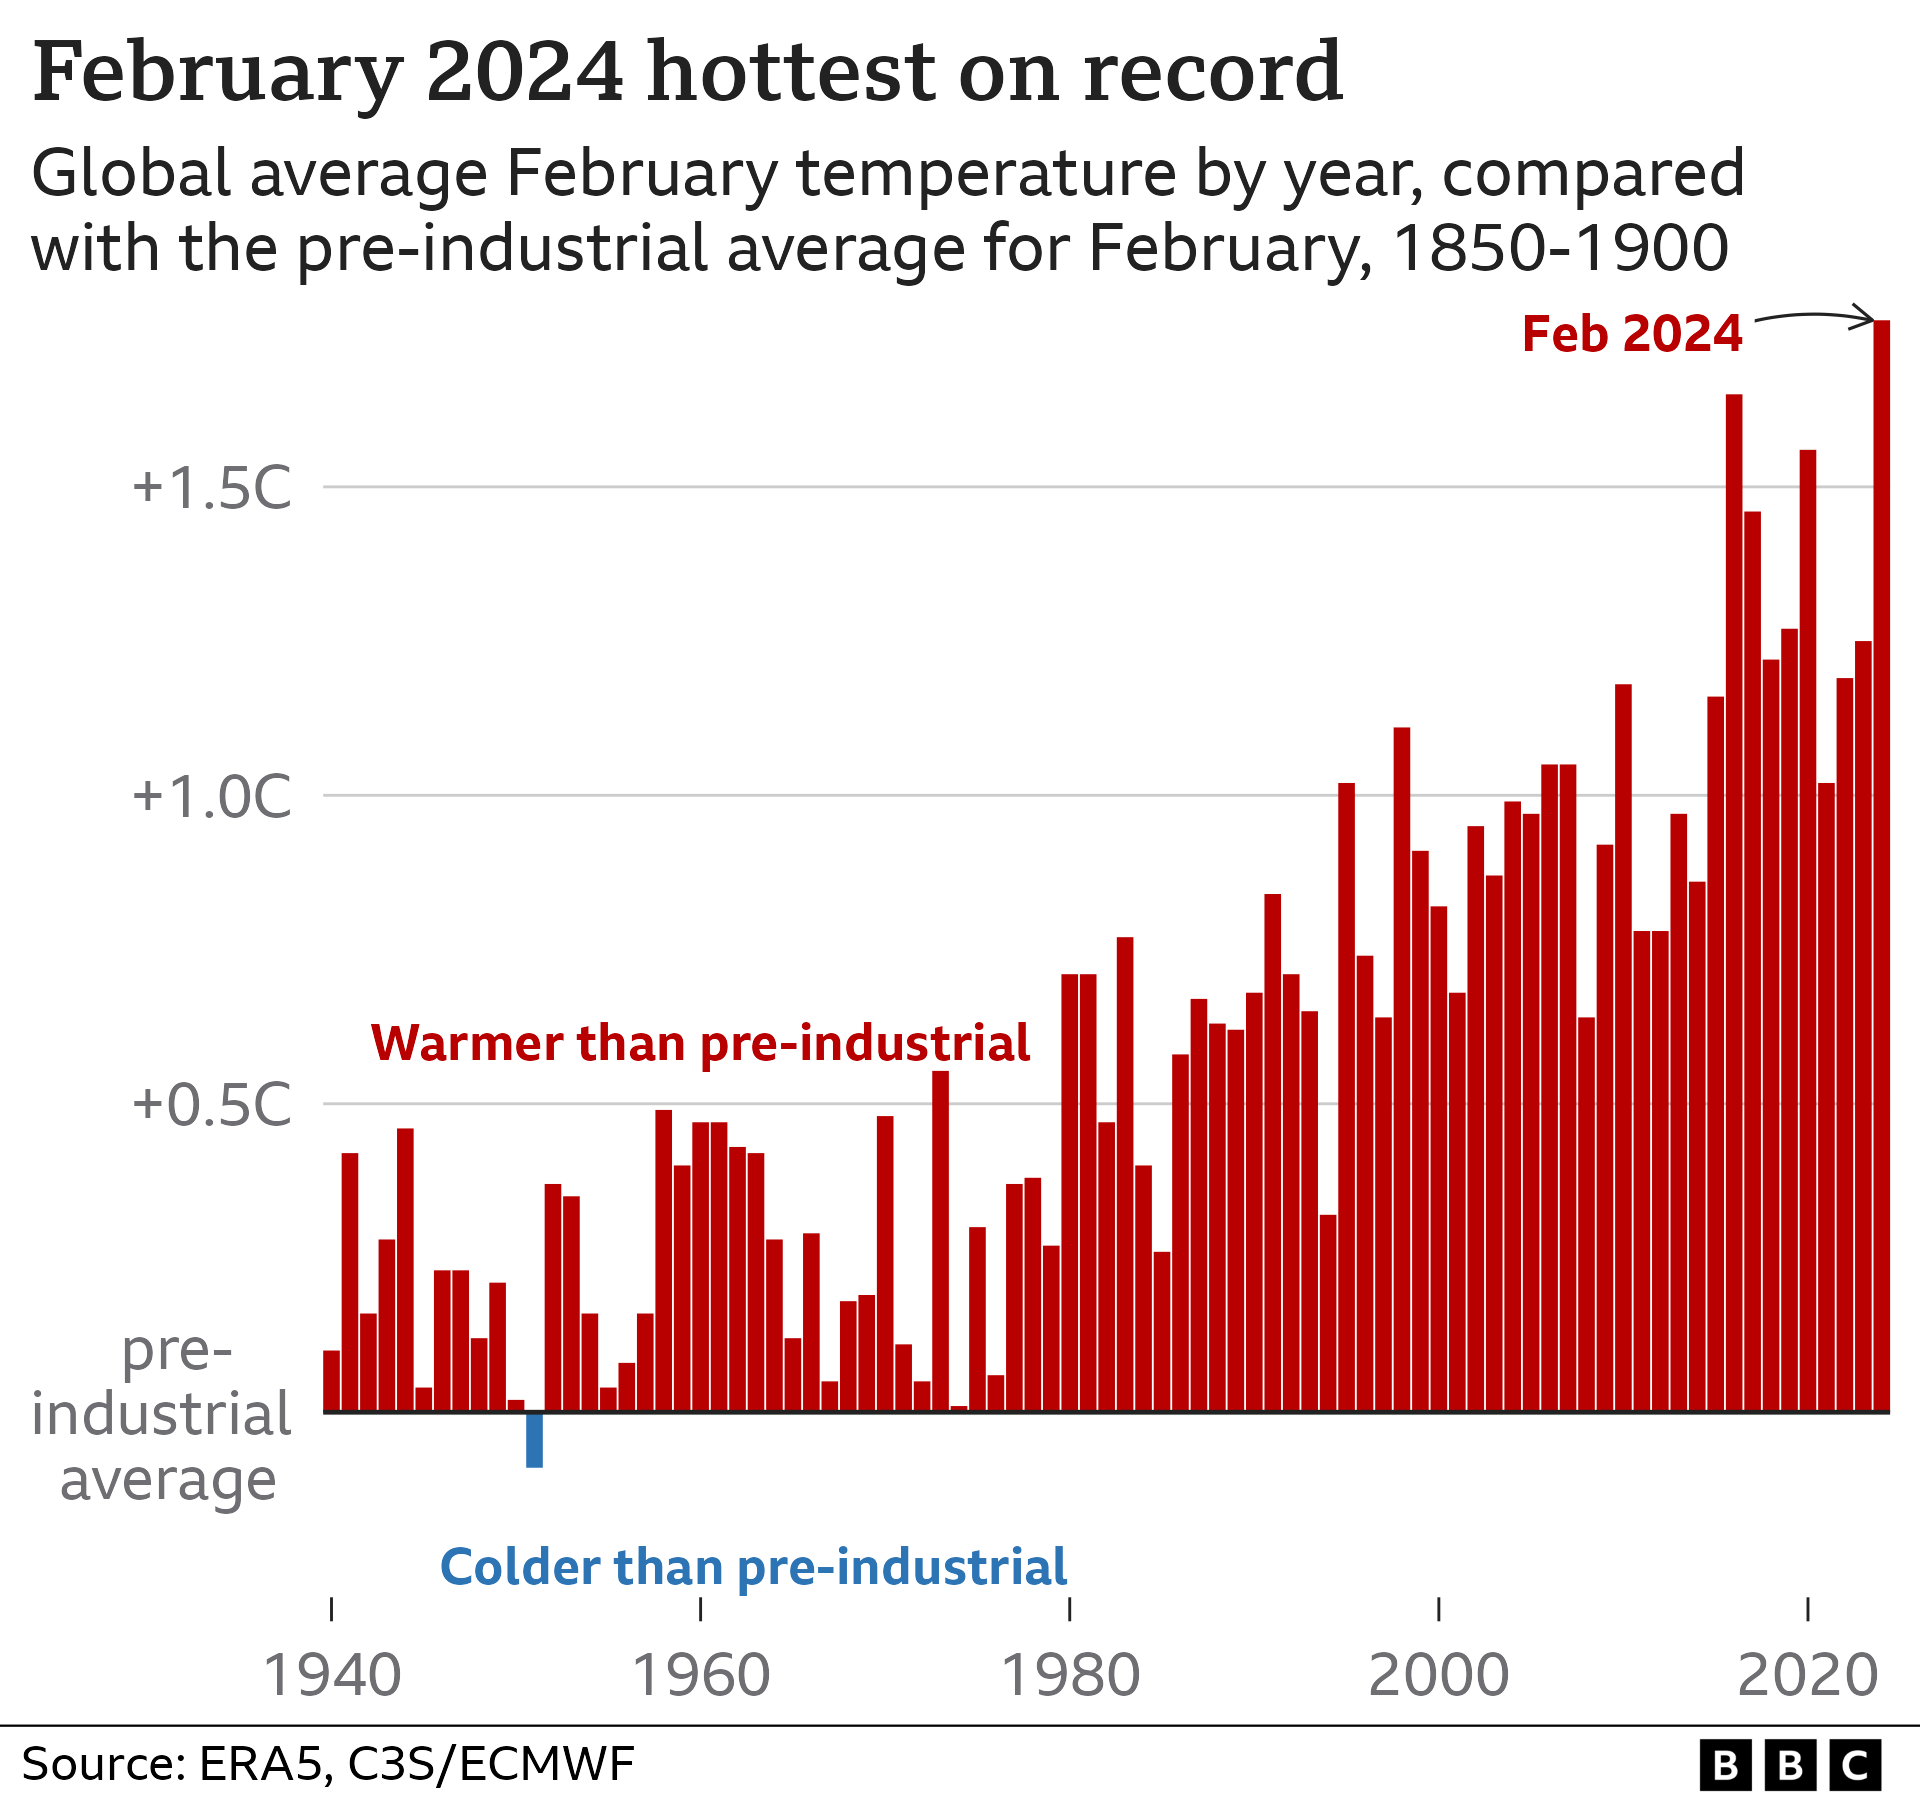 Bar chart of global average February temperatures against pre-industrial levels, 1940 to 2024. February 2024 is the hottest on record at 1.77C above pre-industrial, and their has been an increasing trend over time.